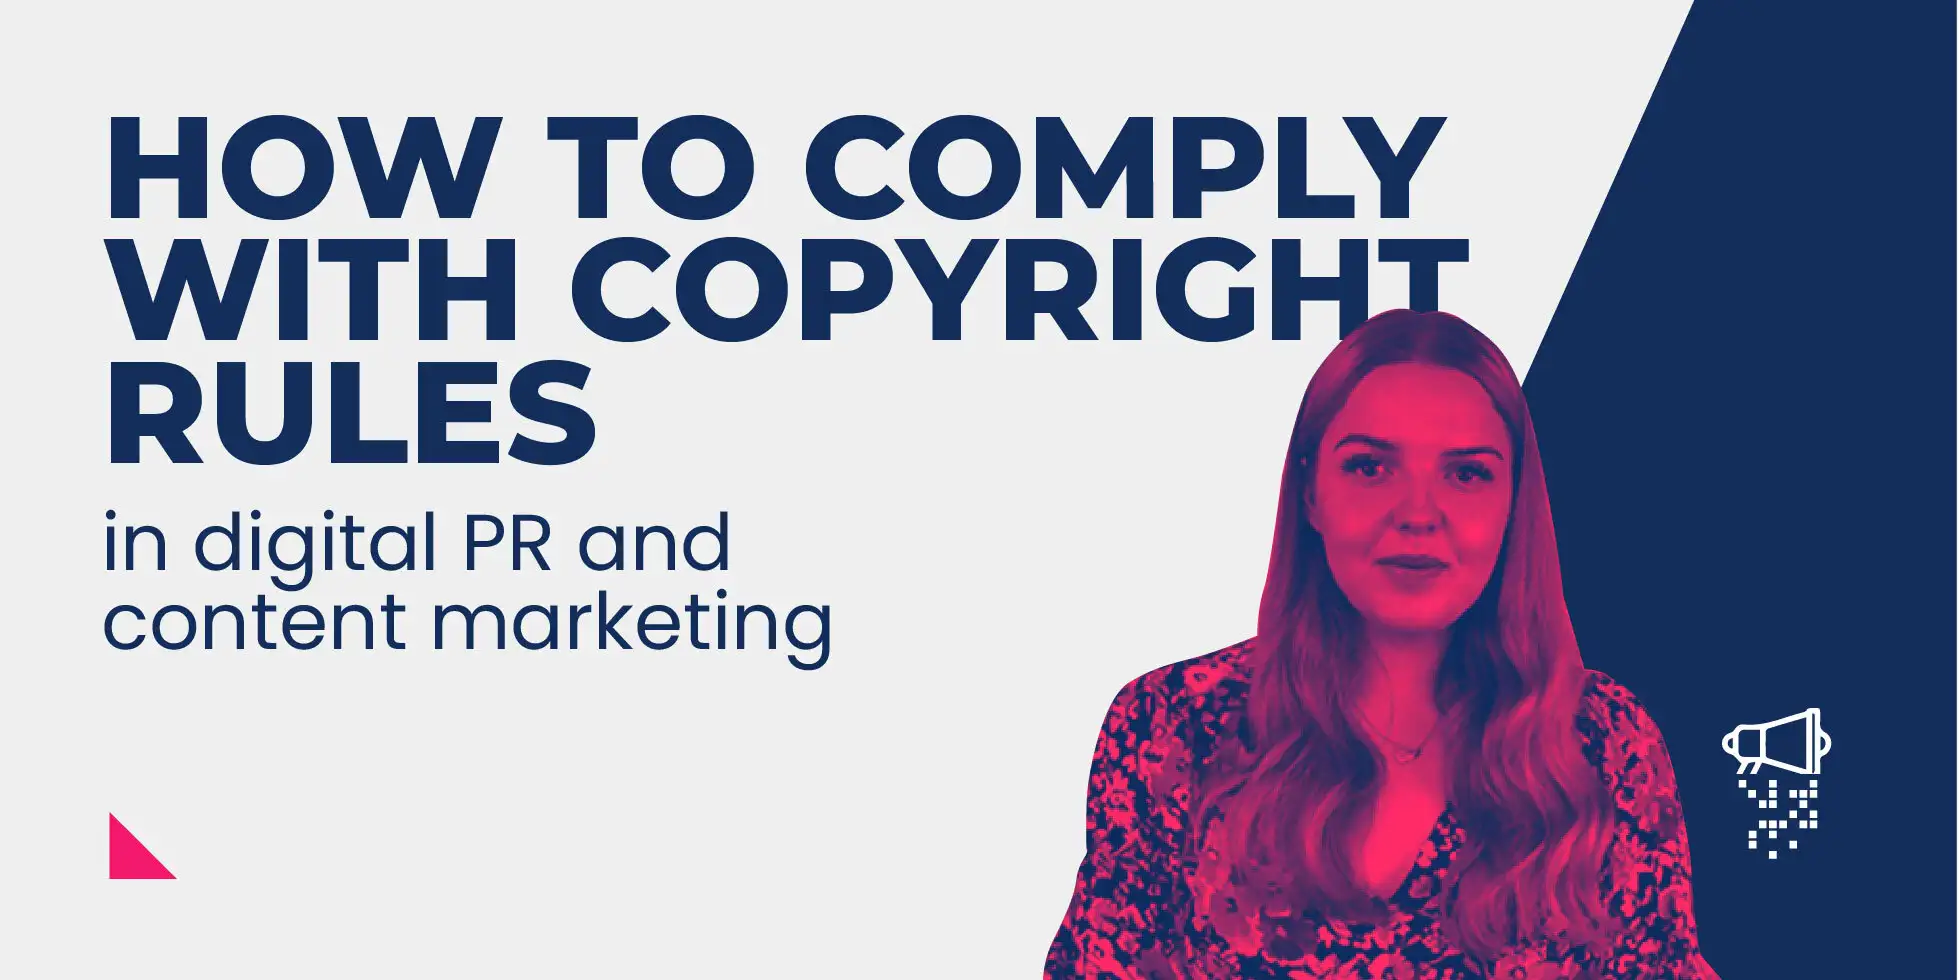 How to Comply with Copyright Rules in Digital PR & Content